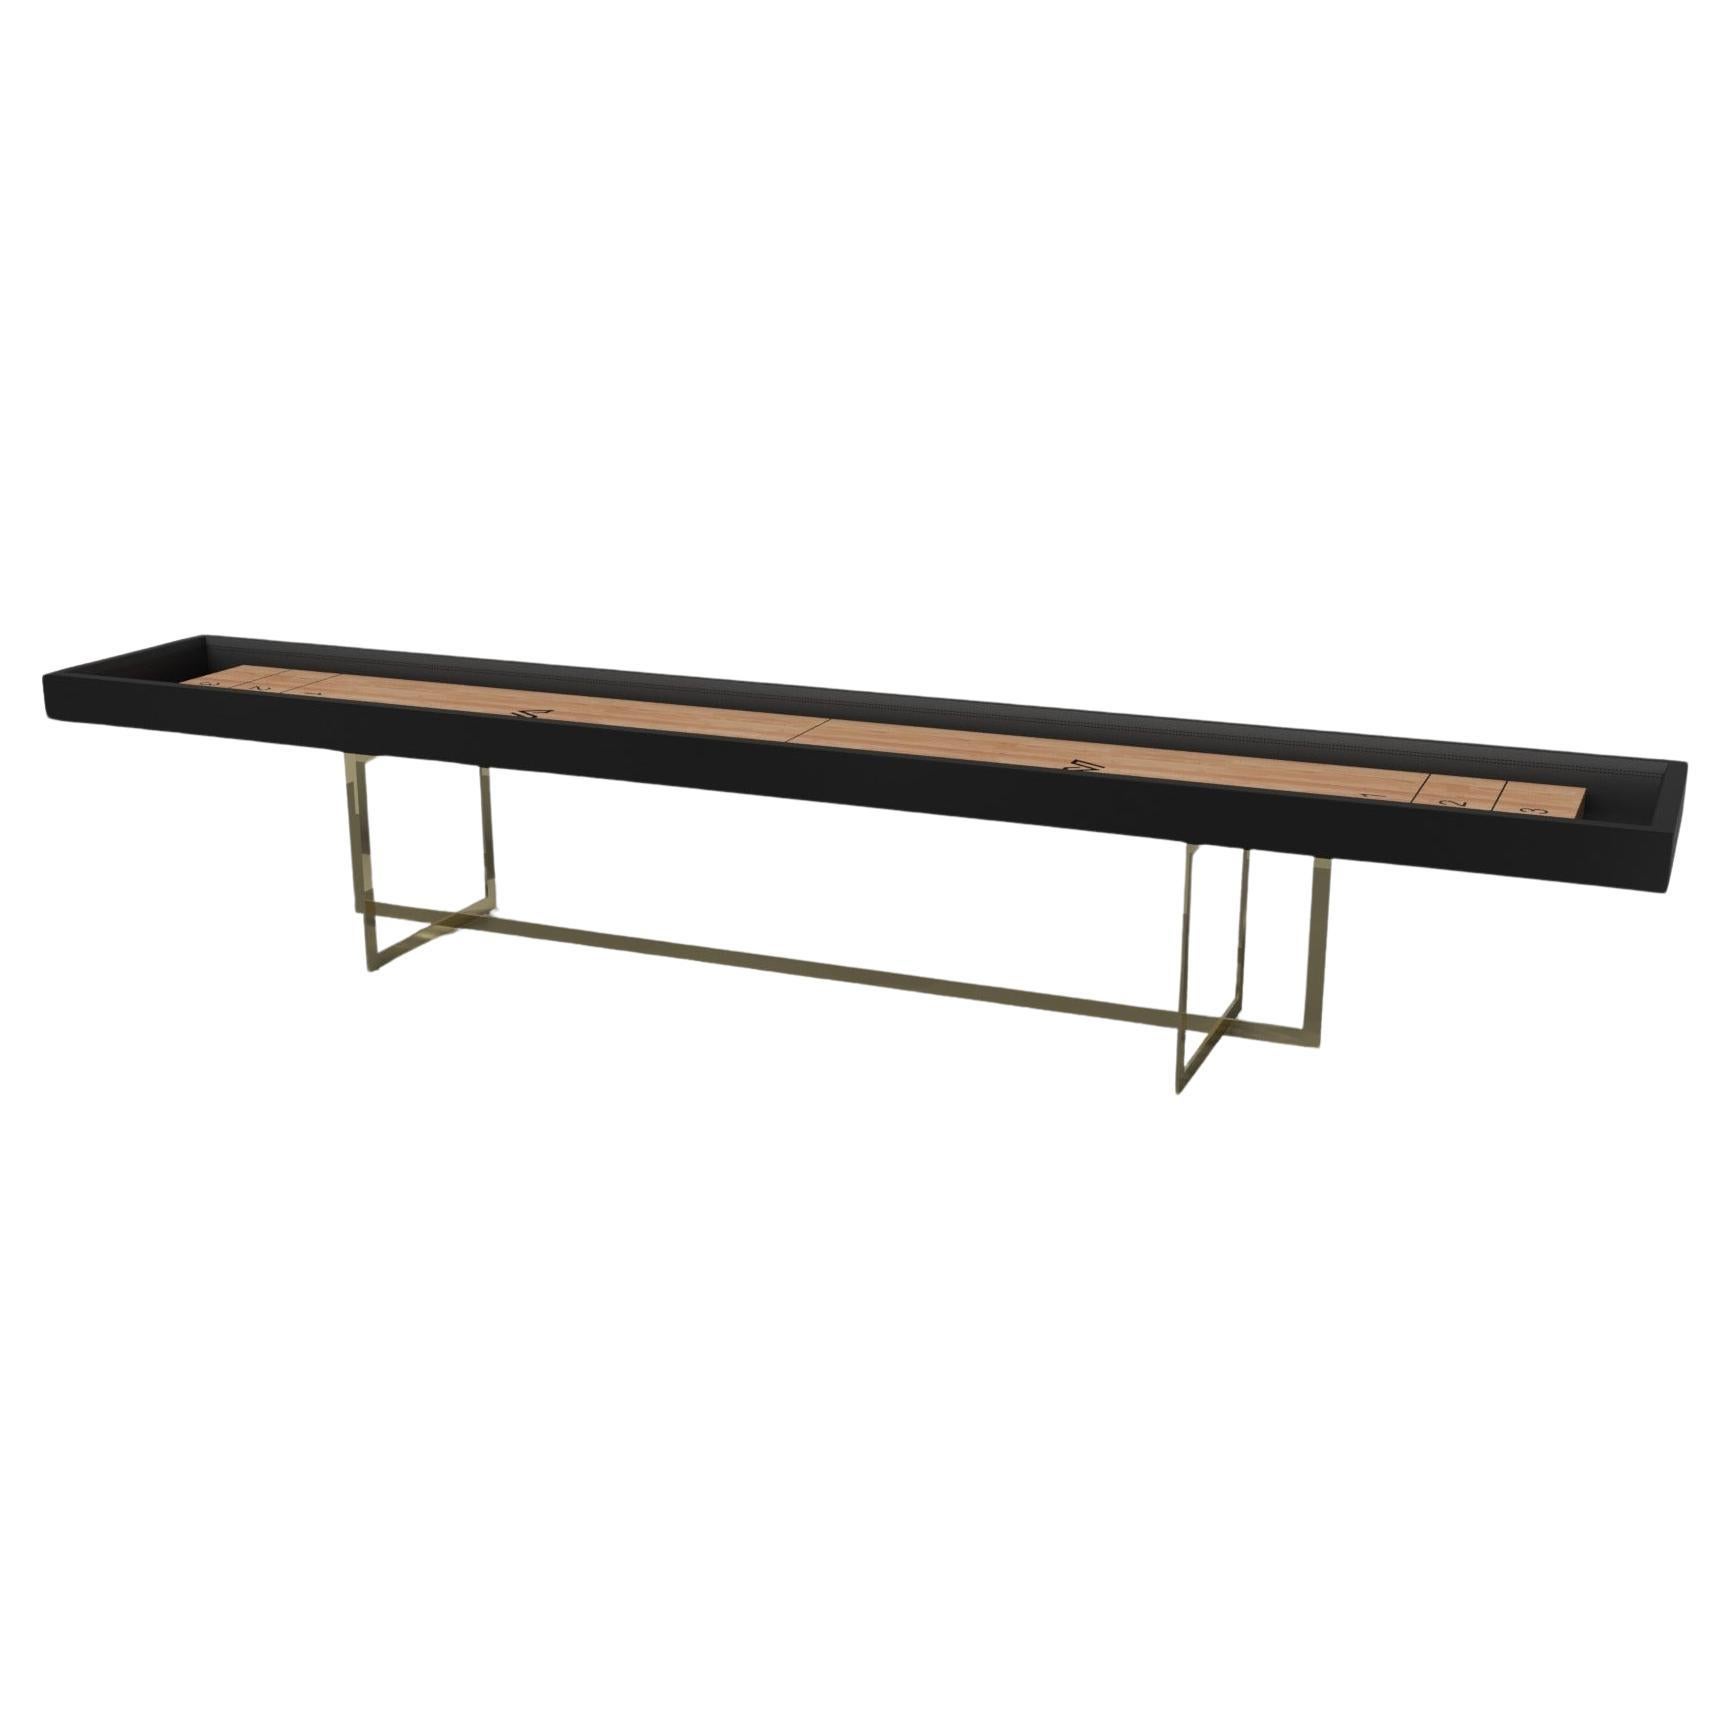 Elevate Customs Beso Shuffleboard Tables/Brass Stainless Steel Metal in 14' -USA